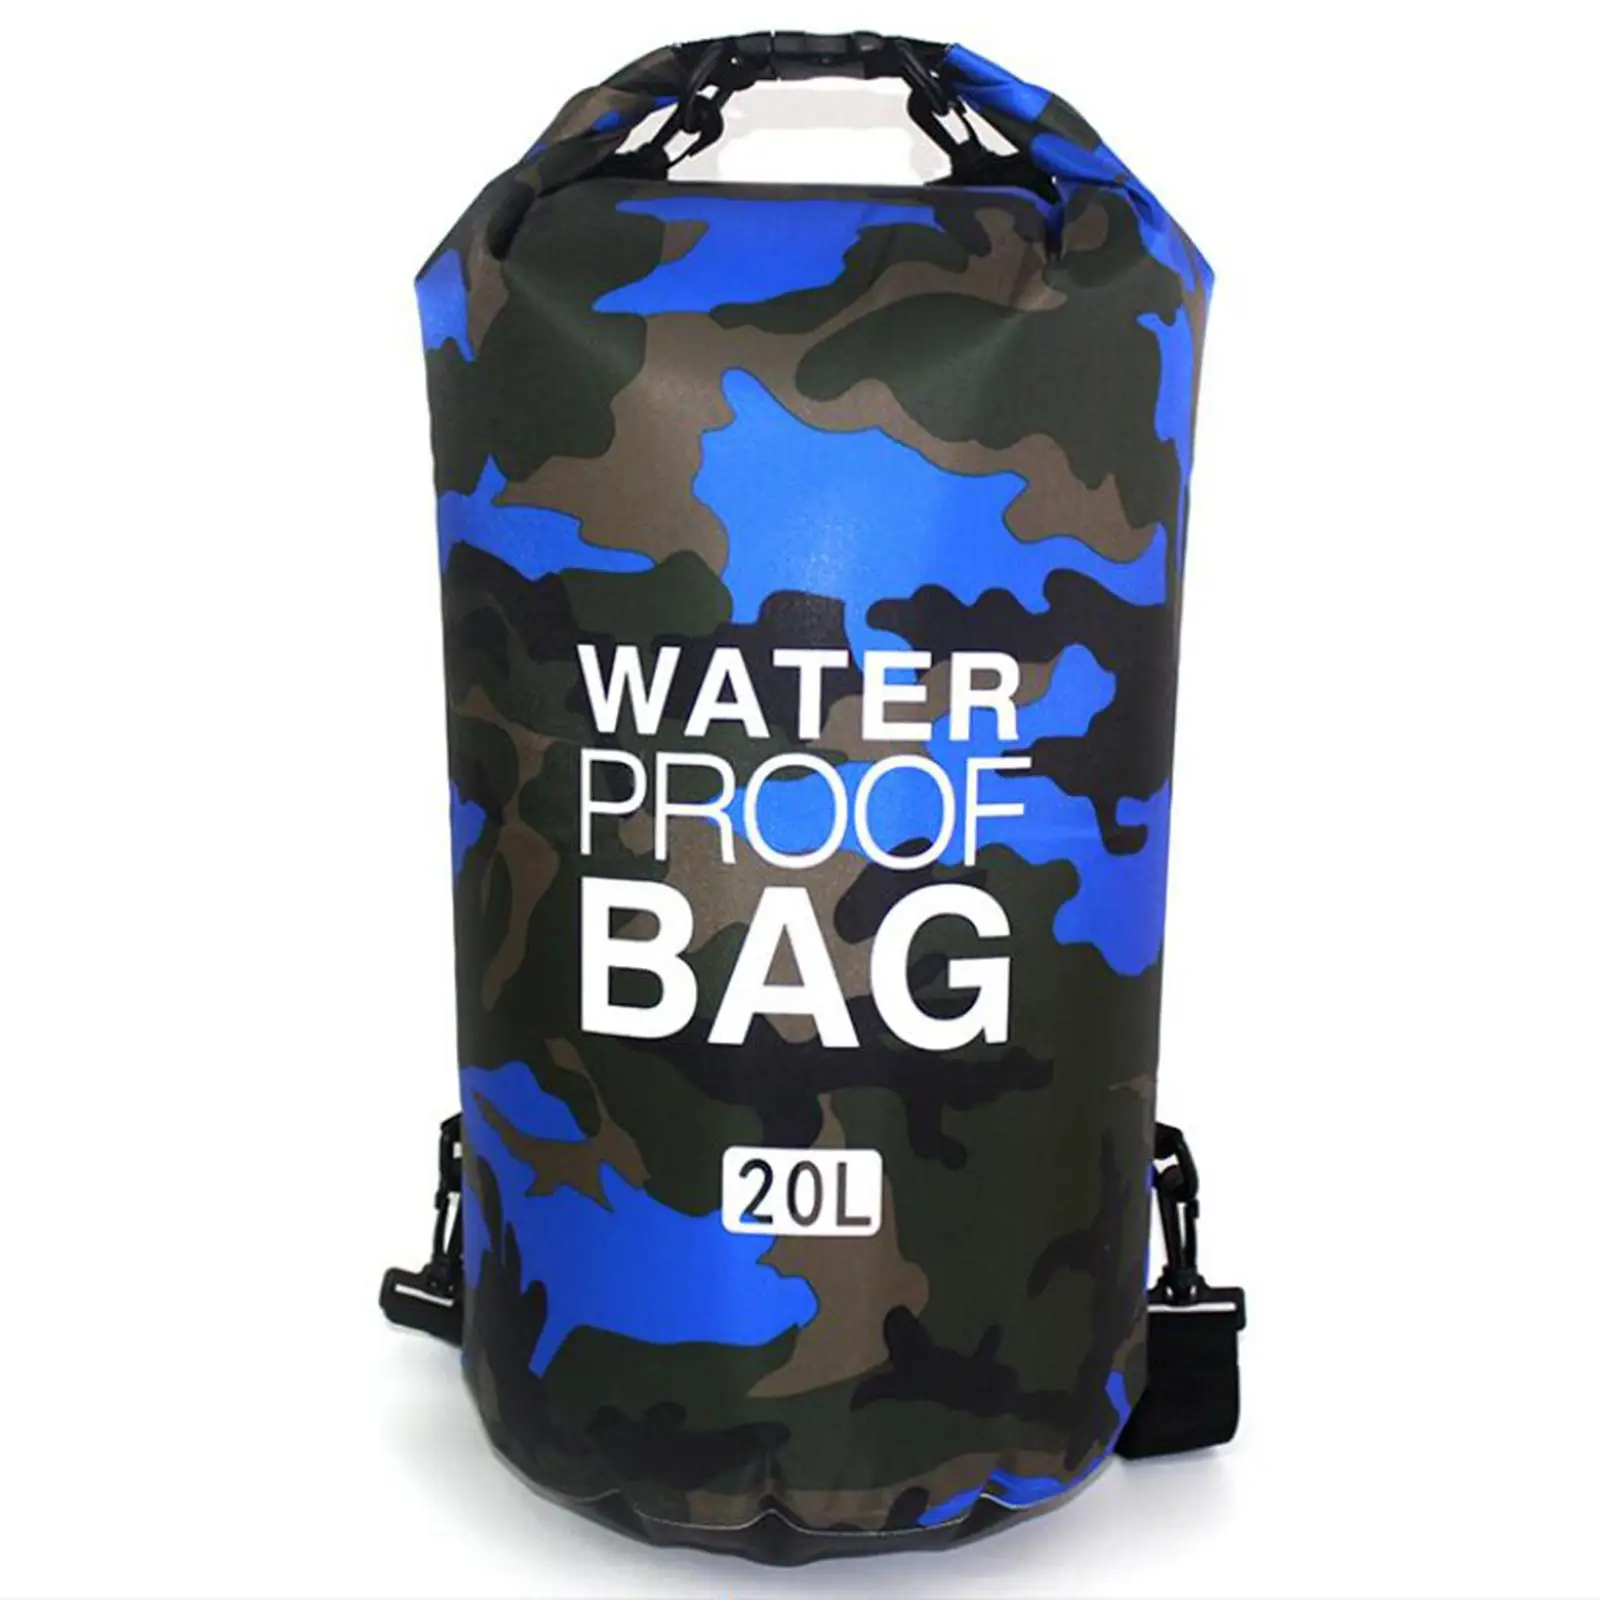 6x Waterproof Dry Bag Keep Gear Dry Roll Top Duffle Airtight Drybag Dry Storage Bag for Travel Canoe Backpacking Beach Swimming